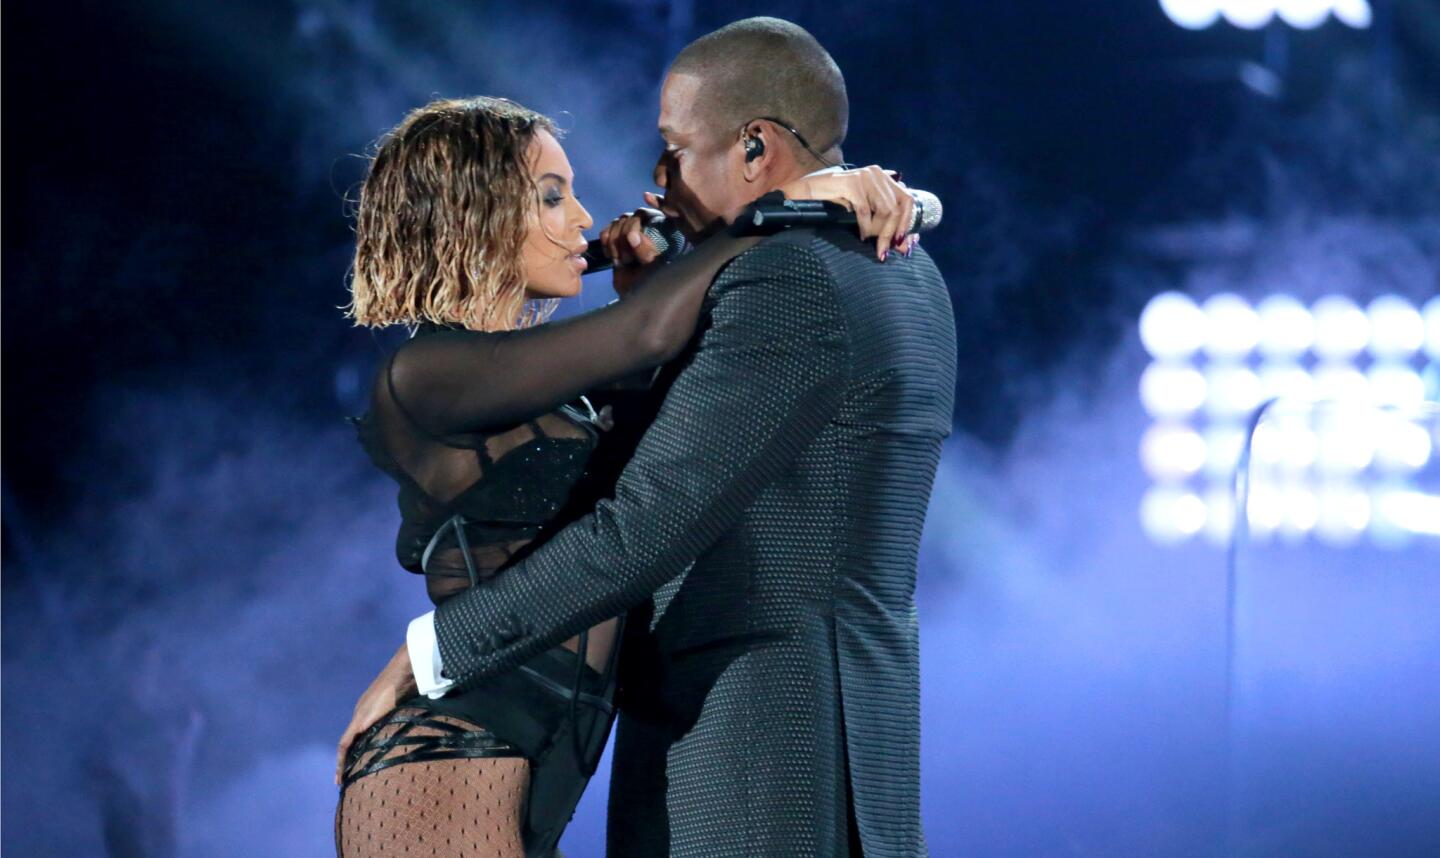 SWEET. Over the weekend, Beyoncé and Jay Z's libidinous R&B groove "Drunk in Love" received a set of delicious remixes: Kanye West and T.I. added razor sharp verses to respective mixes; alt-R&B crooner the Weeknd unleashed a woozy cover that dialed up the raunch; and electronic DJ-producer Diplo turned the ode to married sex into a sweaty house jam.